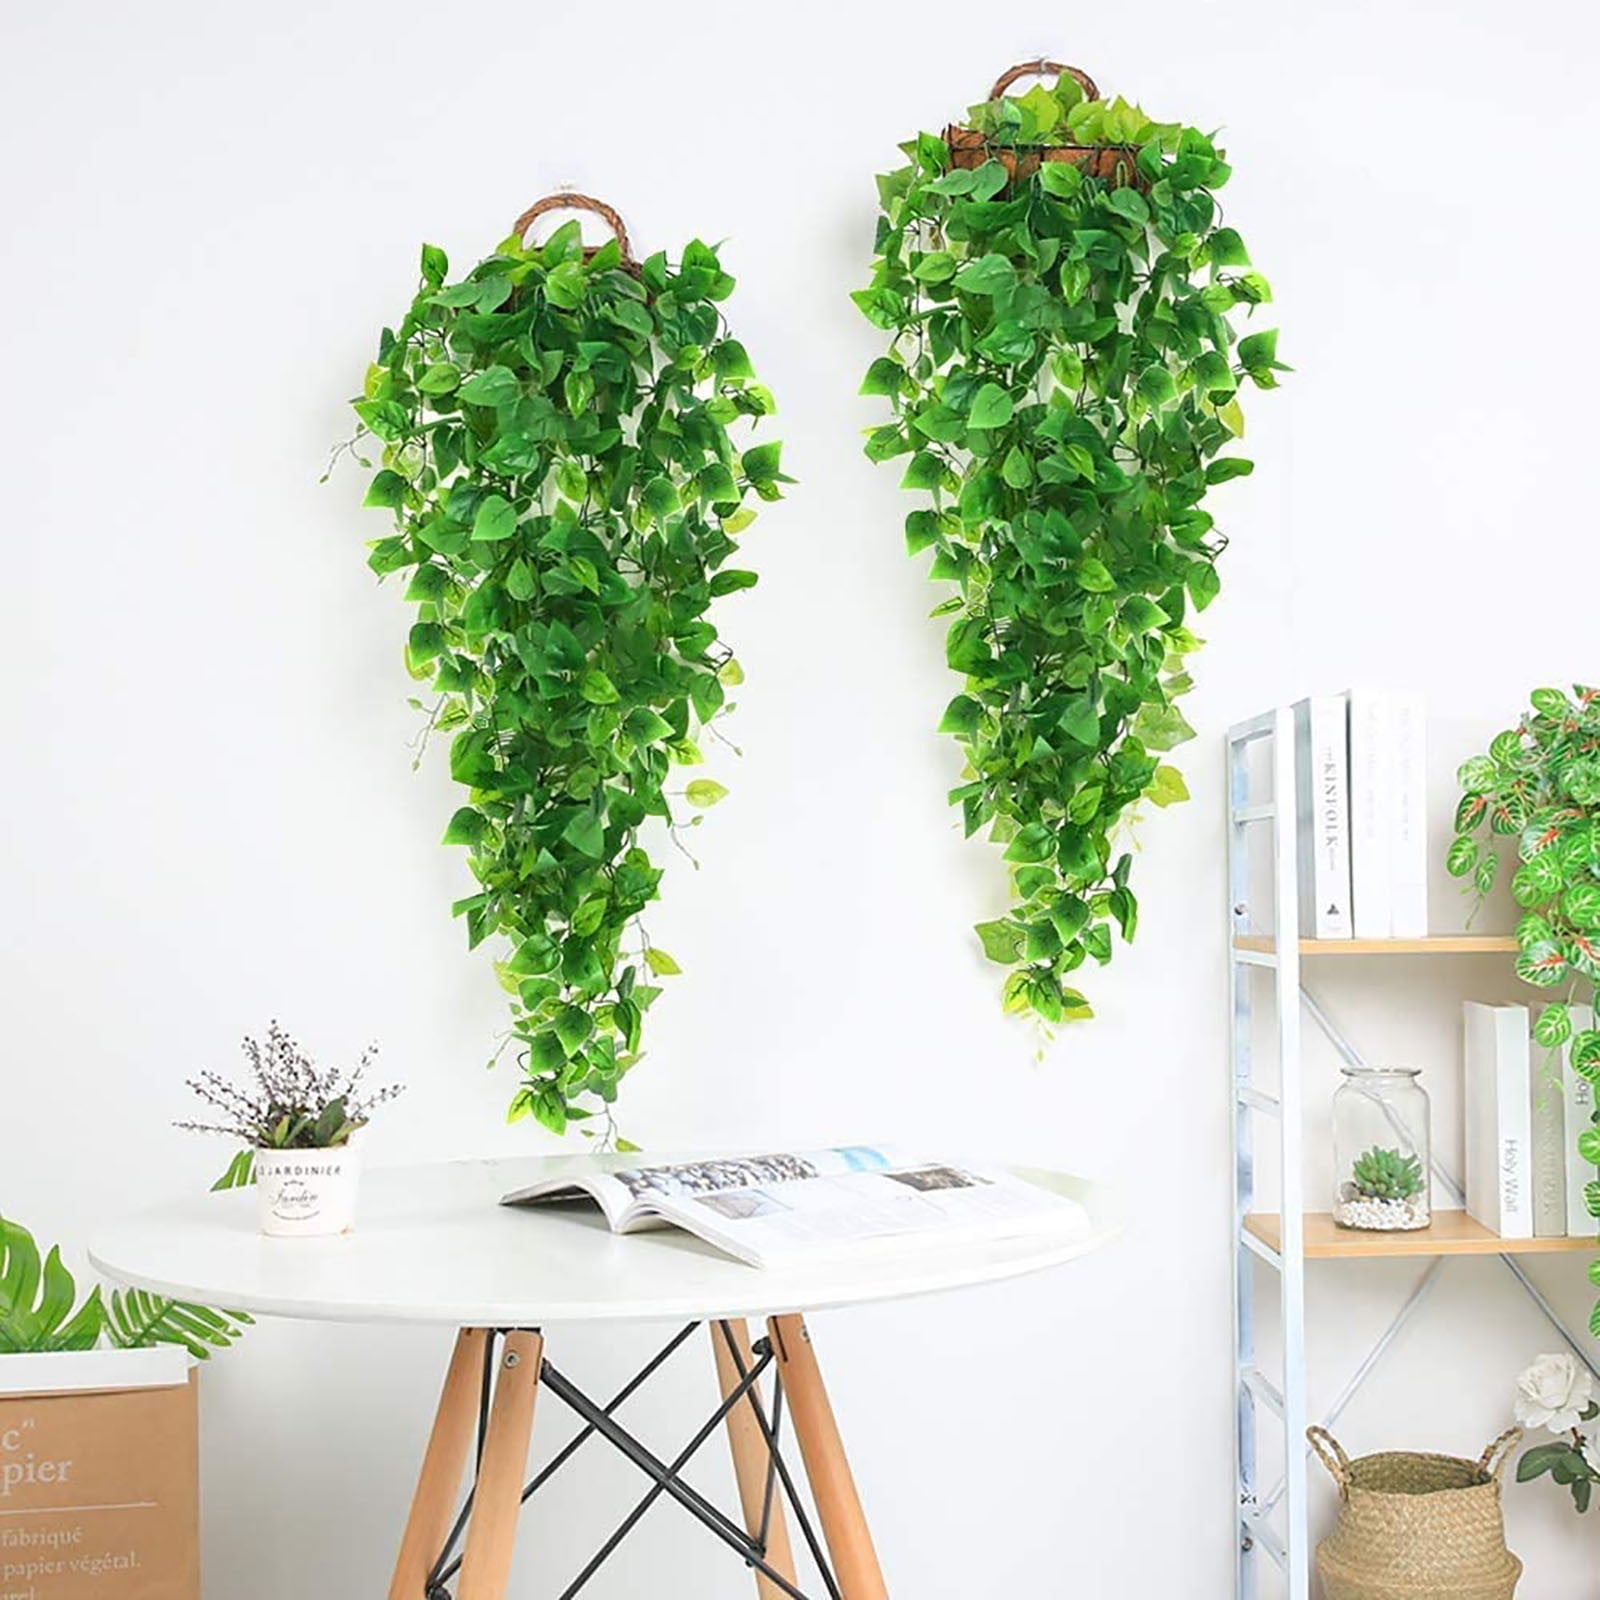 YOLETO 24 Pack Artificial Ivy Garland, 165Ft Fake Ivy Vines for Home Decor,  Faux Hanging Plants for Indoor Outdoor Greenery Aesthetics Decoration